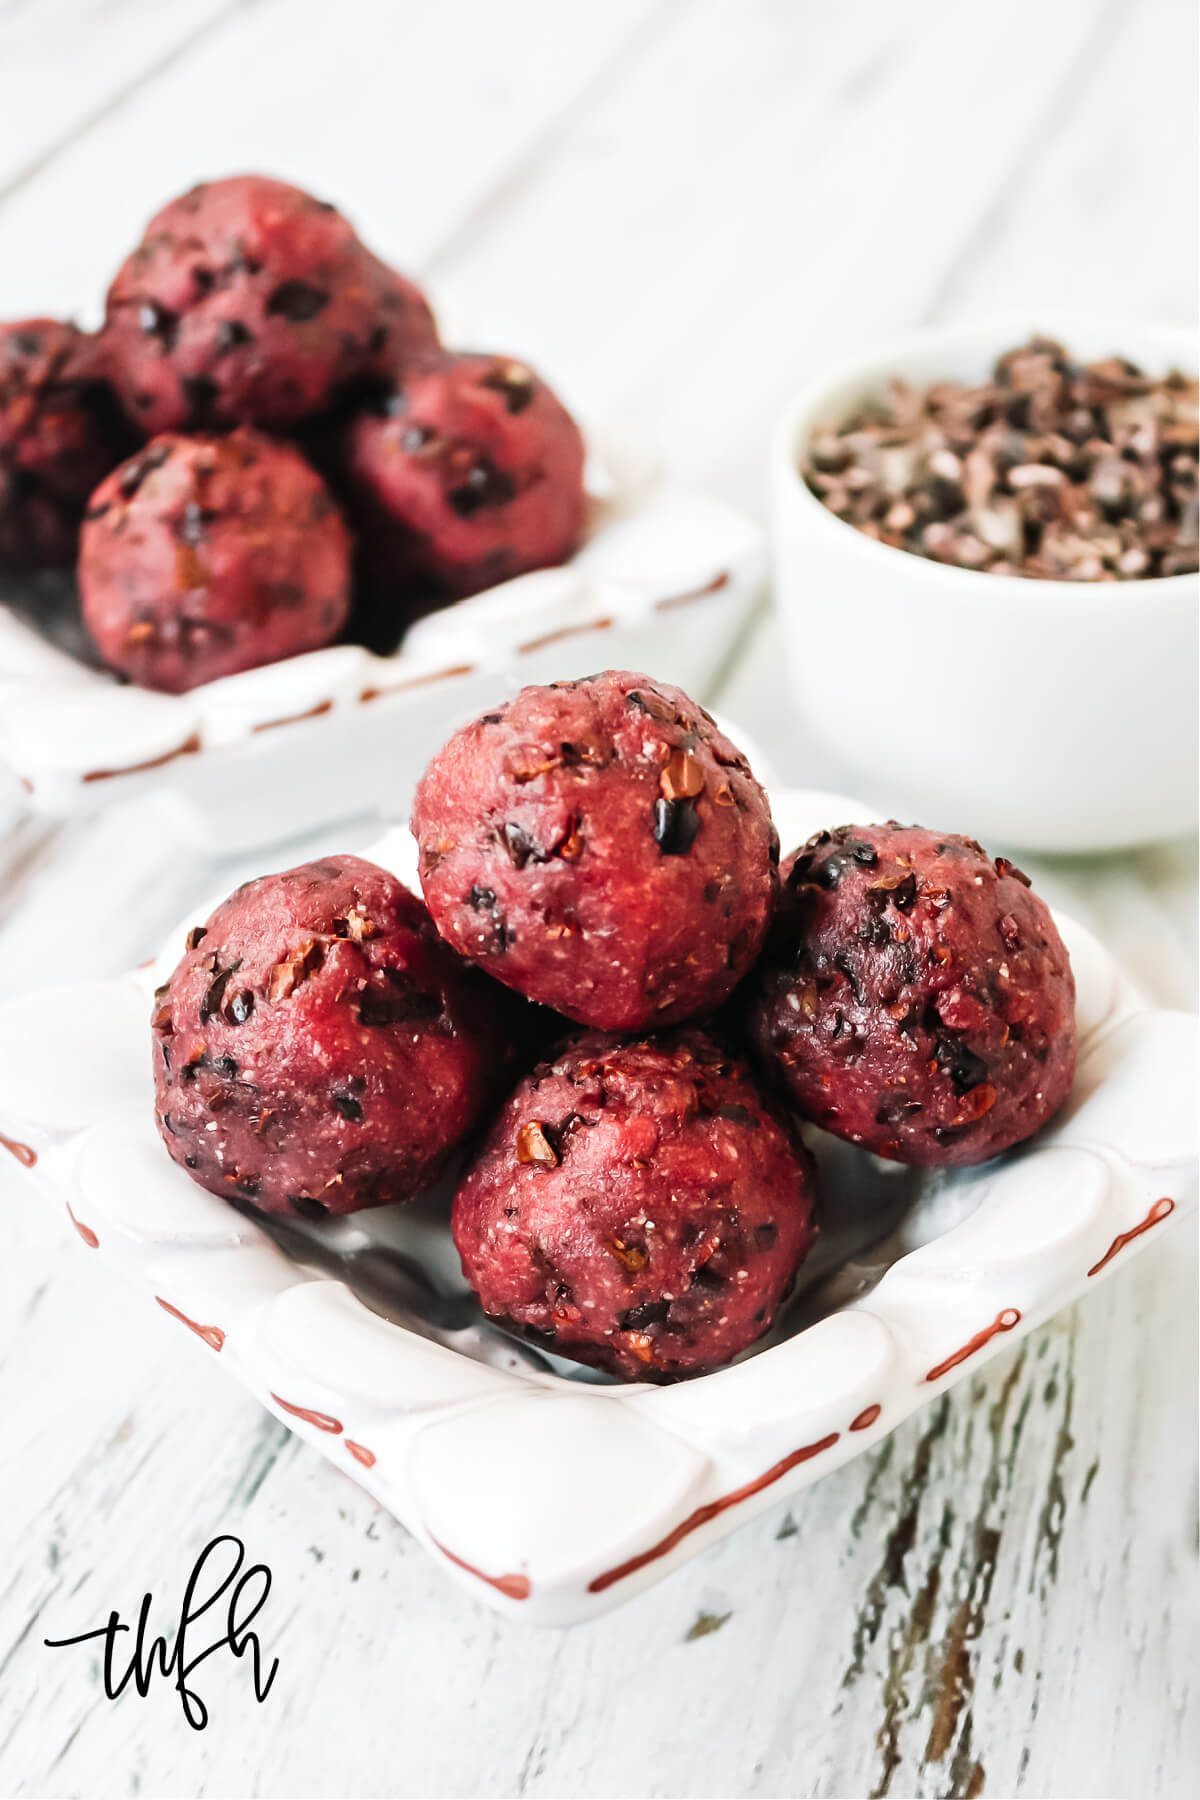 Vertical image of four red truffles in a small decorative bowl on a weathered wood background